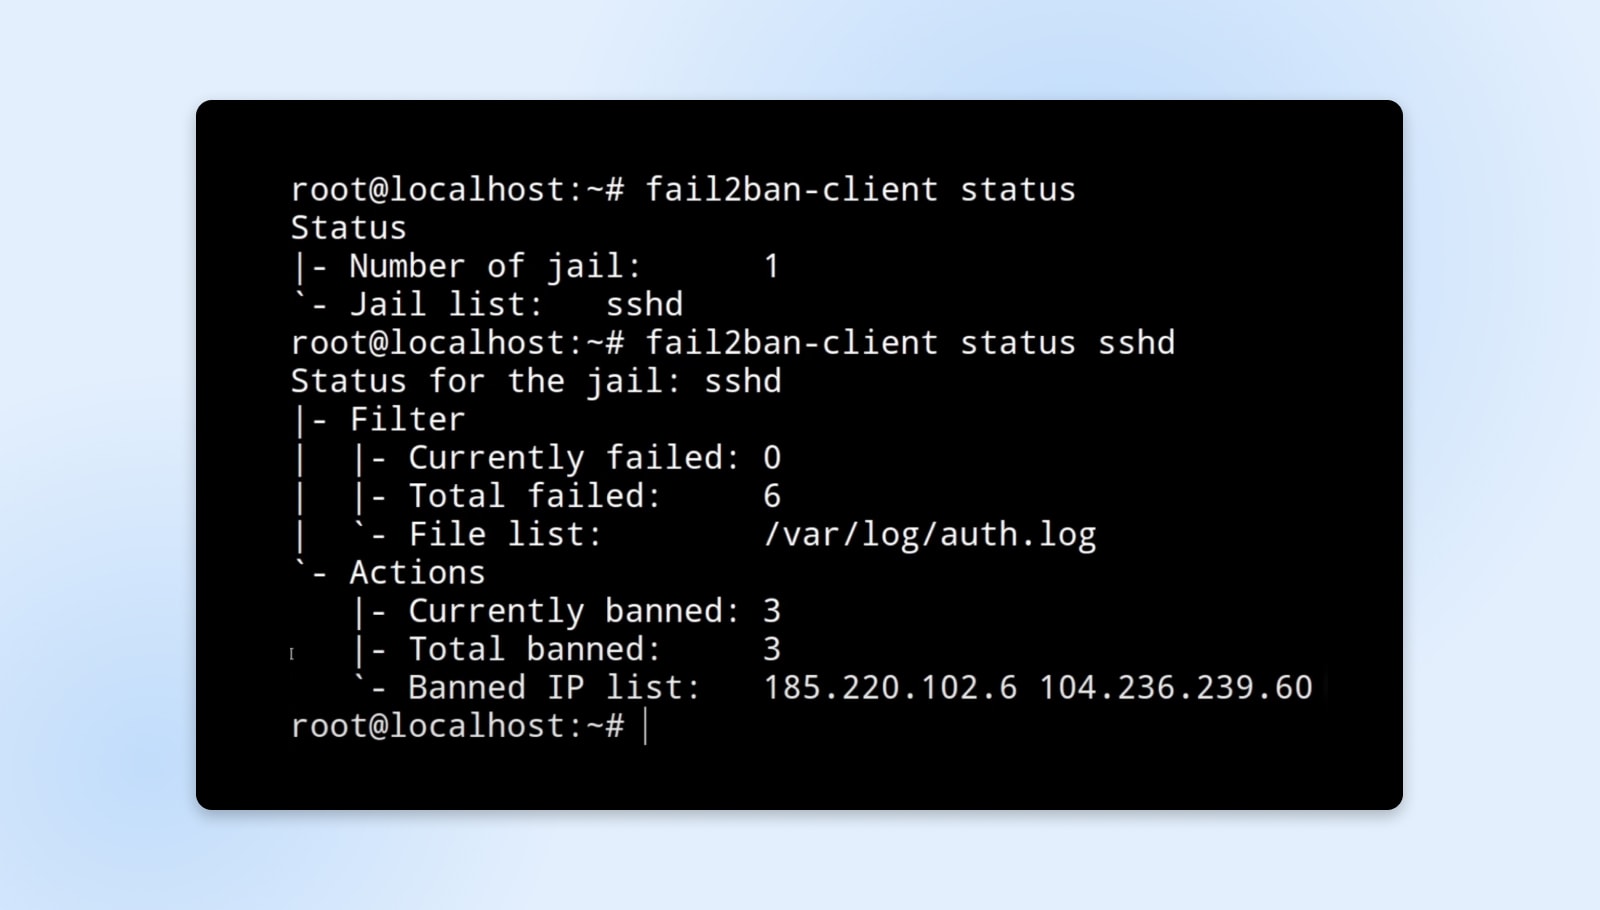 root@localhost:~# fail2ban client status reporting 6 total filed under filter and 3 currently banned, 3 total banned under actions 